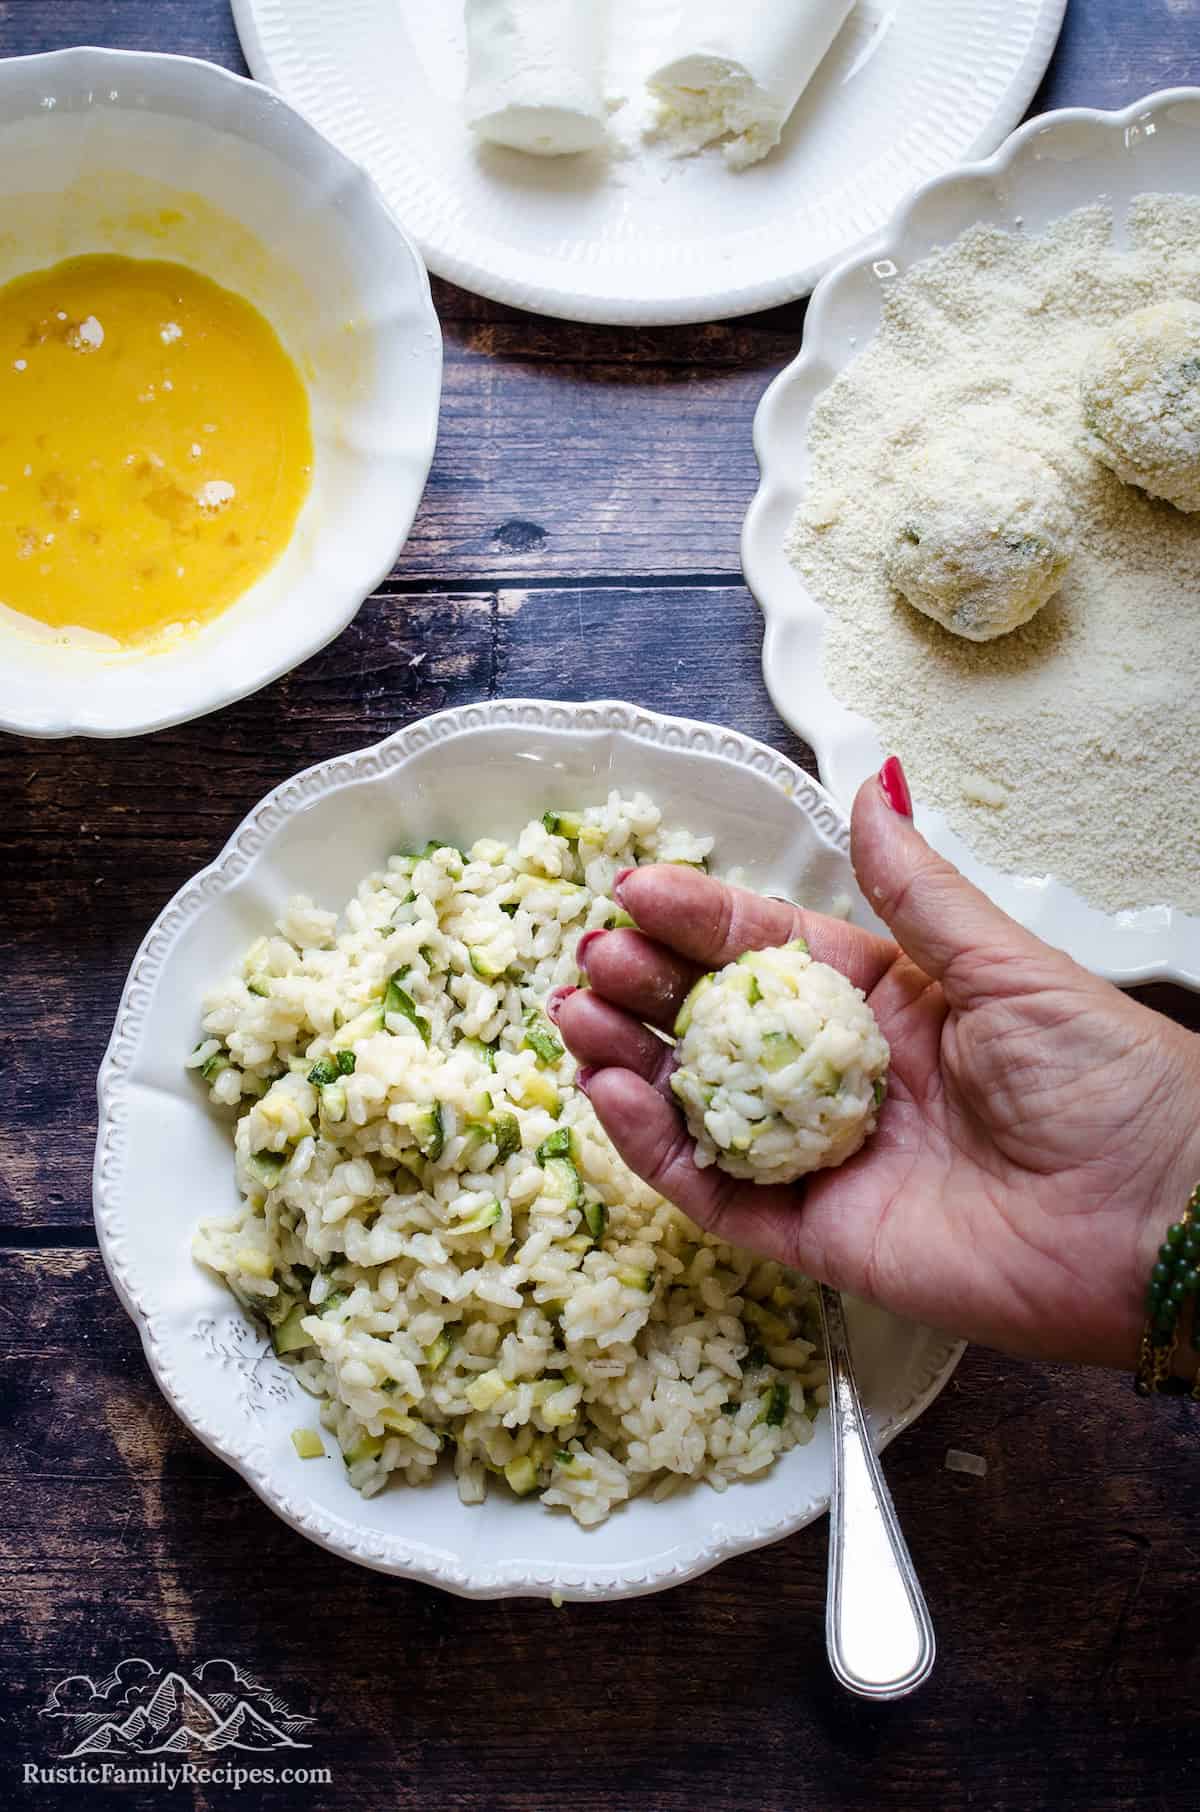 A hand holding a rice ball over a bowl of cooked zucchini risotto, surrounded by bowls filled with coating ingredients.